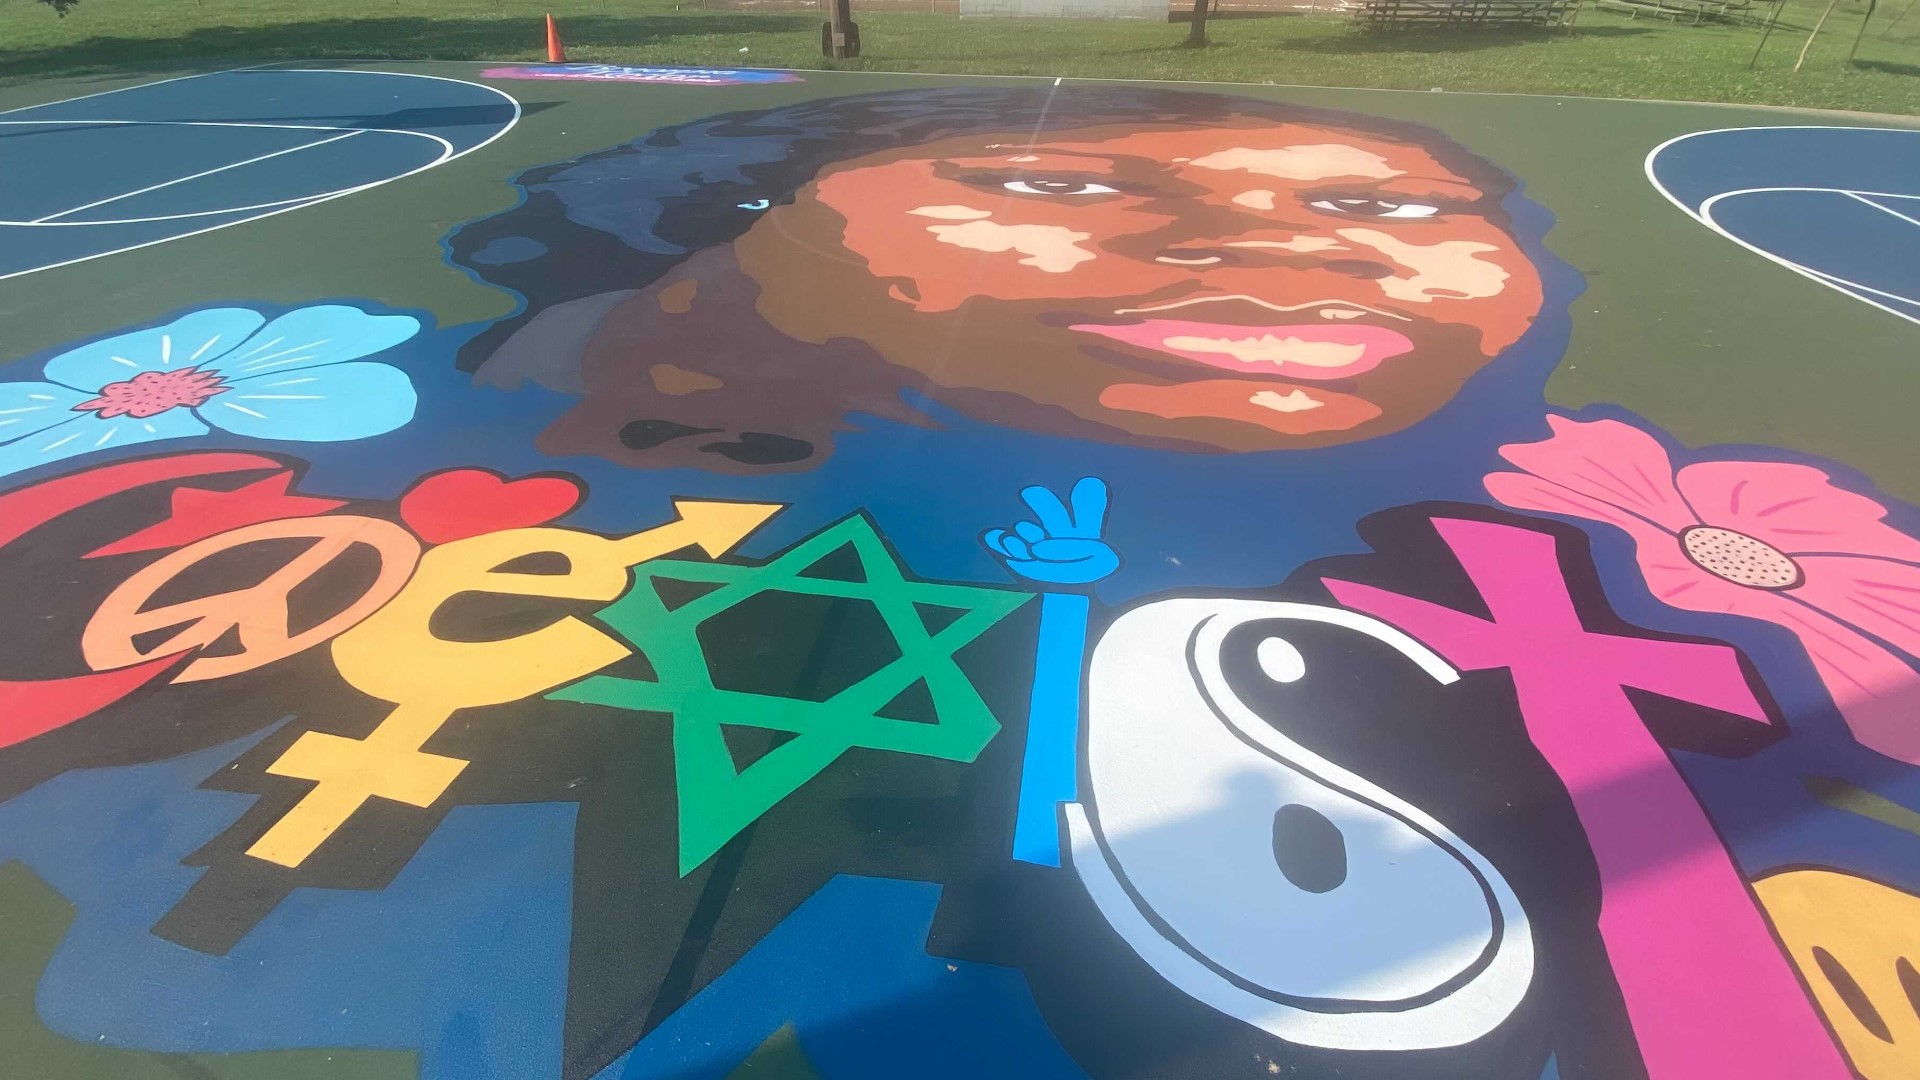 The mural will be located at the newly renovated basketball court at Lannan Park in Louisville.